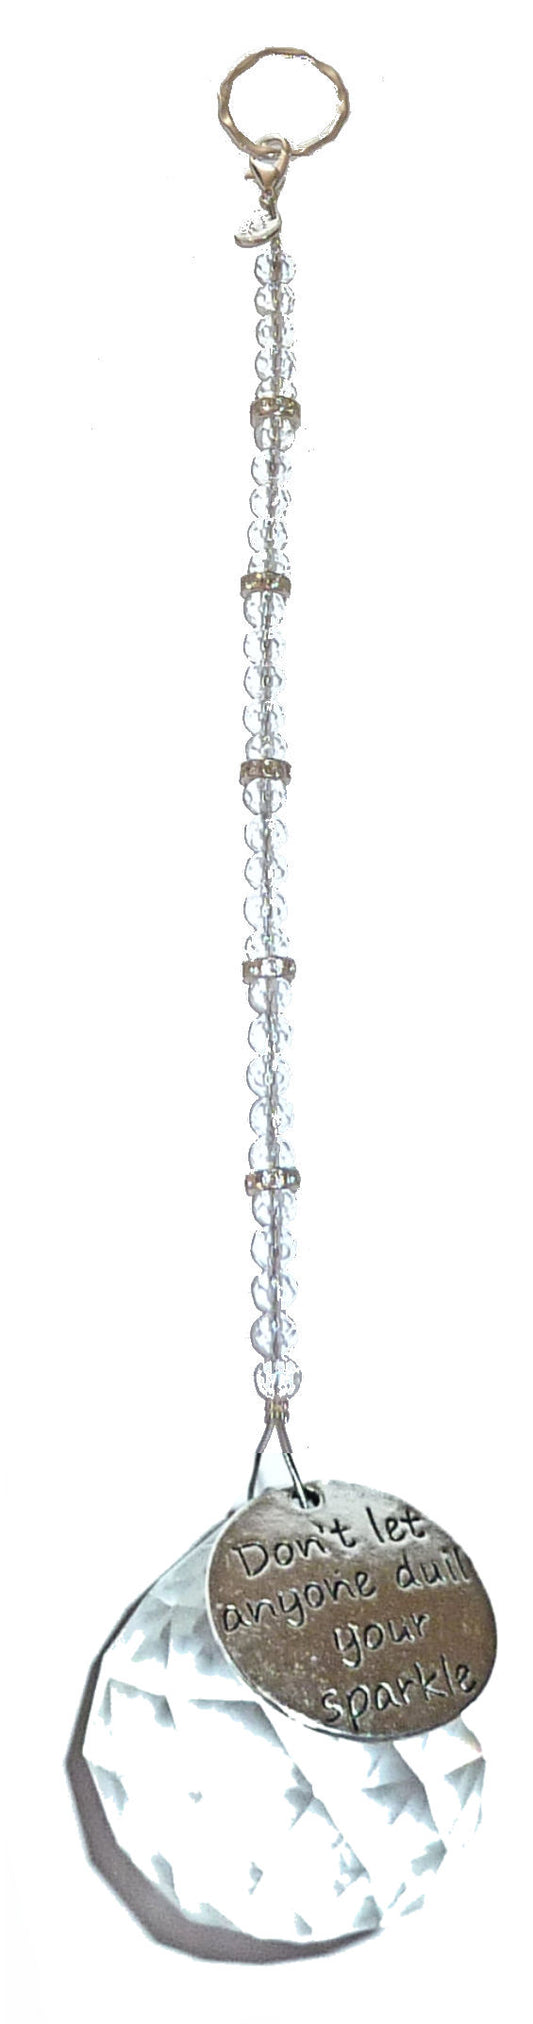 Beaded Suncatcher - Don't Let Anyone Dull Your Sparkle